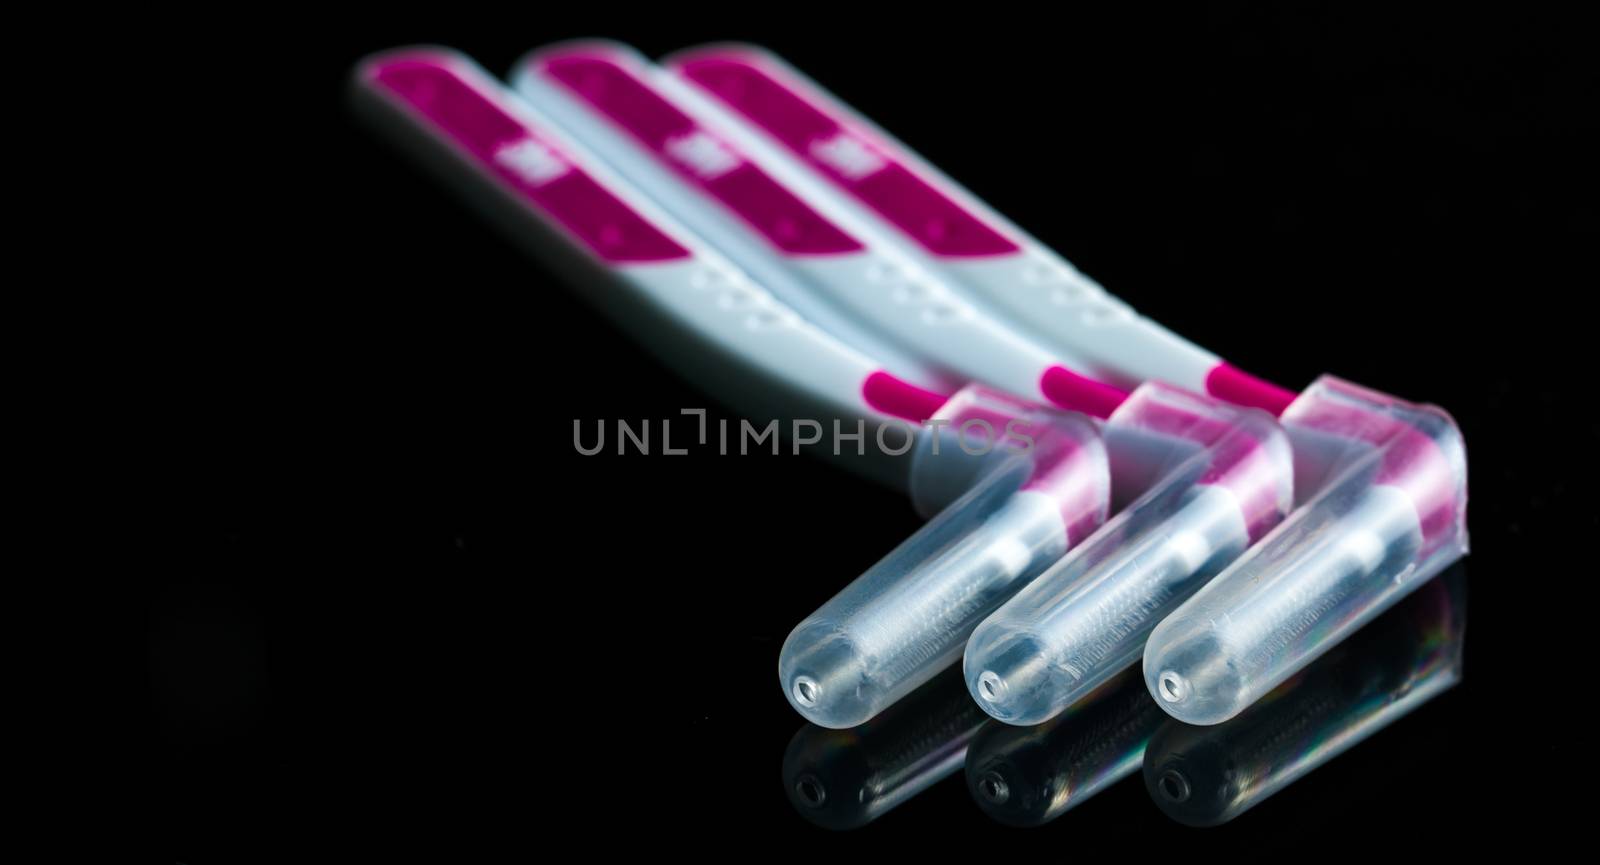 Three interdental brush with cover isolated on dark background with copy space. Dental care concept. Equipment for get rid of food stuck in teeth